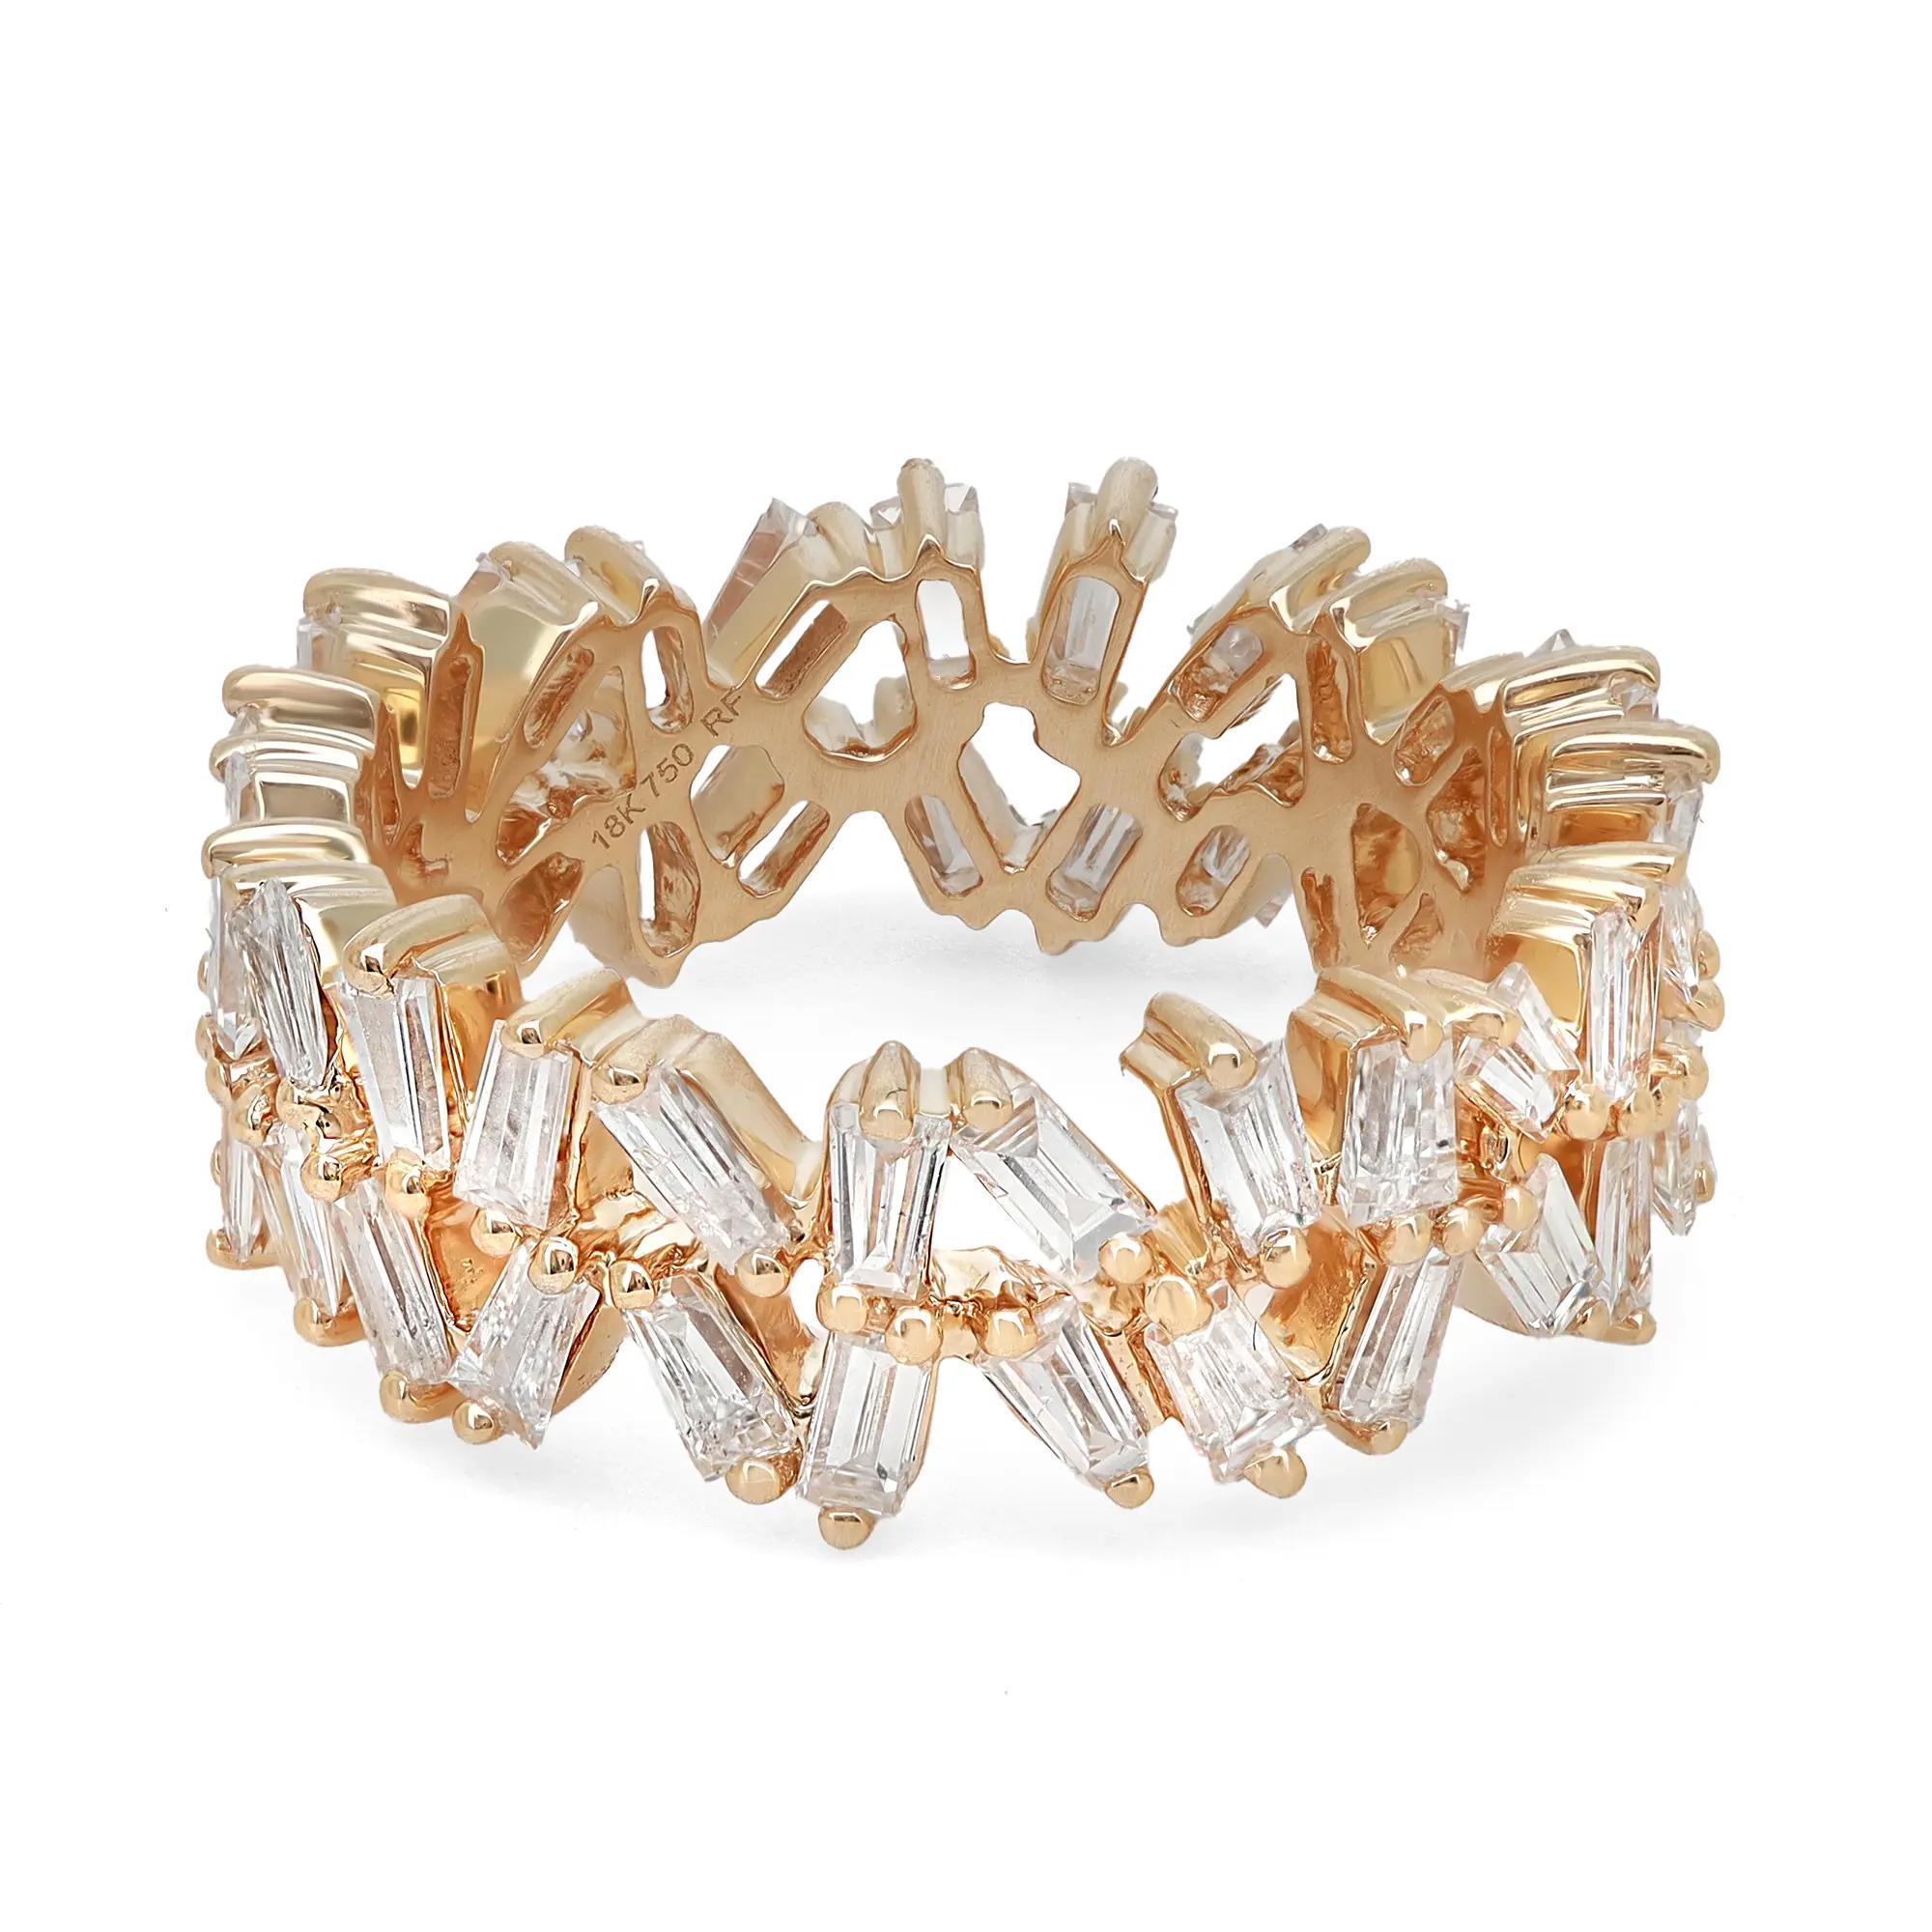 Sparkle away with this 18k yellow gold baguette cut diamond band ring. This ring features 50 prong set sparkling baguette-cut diamonds set all around the ring in a zig-zag pattern. This piece is perfect for a gift or as a promise ring. Super